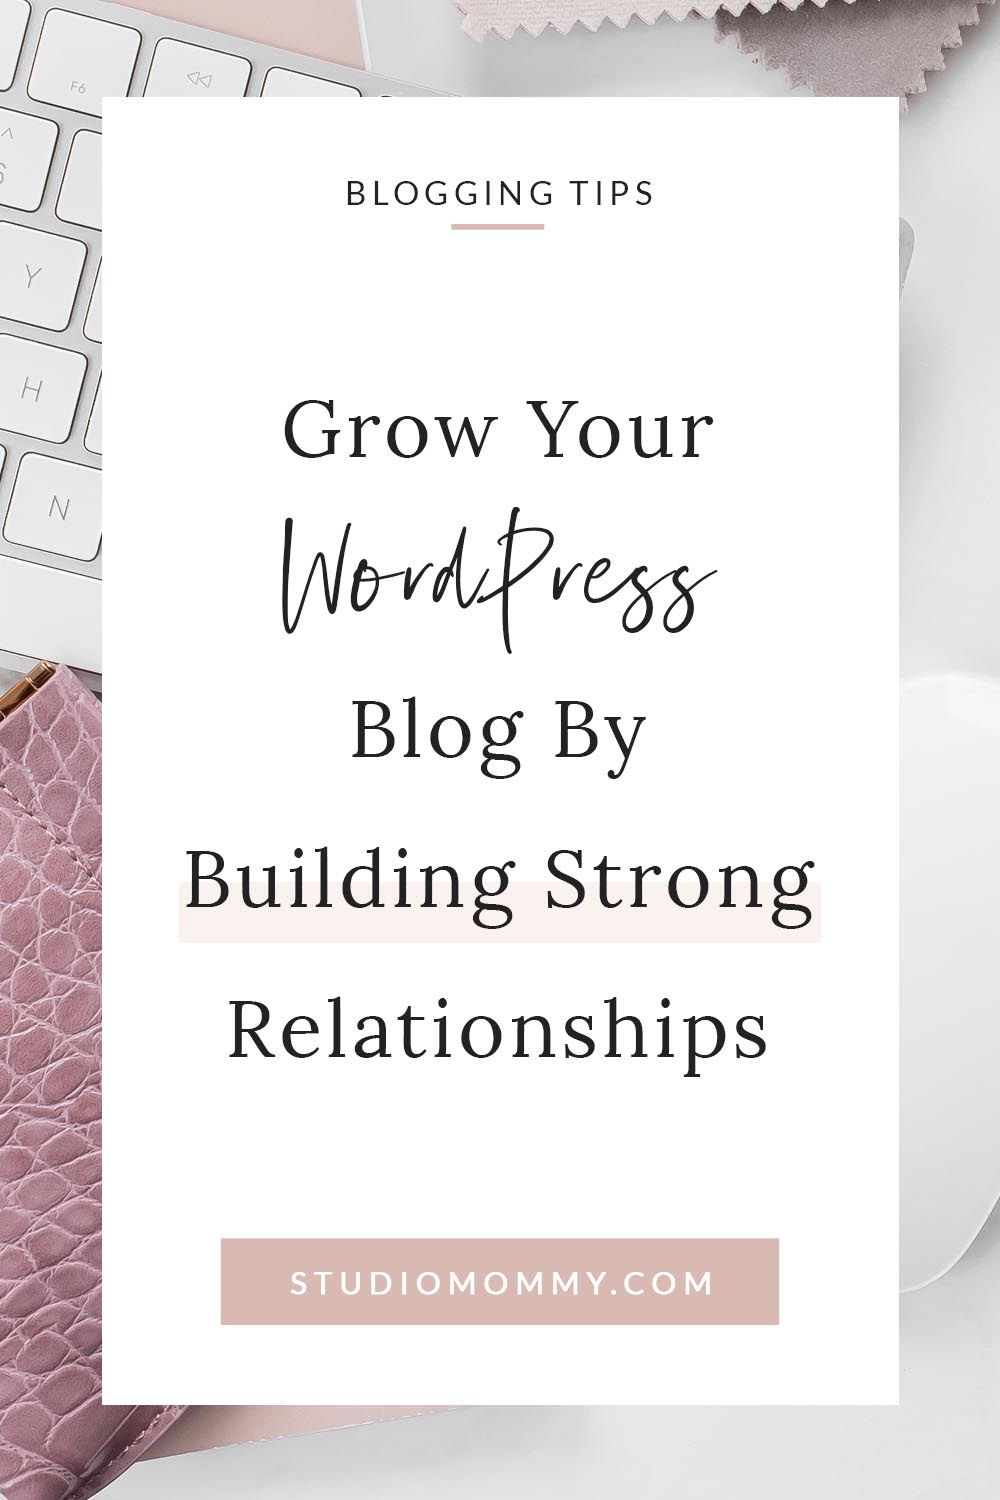 Building relationships with other bloggers in your niche is one of the top ways to grow your WordPress blog and your credibility on the web. If you're really ready to do what it takes to see your blog grow, one of your best options is certainly to reach out to other bloggers and to build relationships.